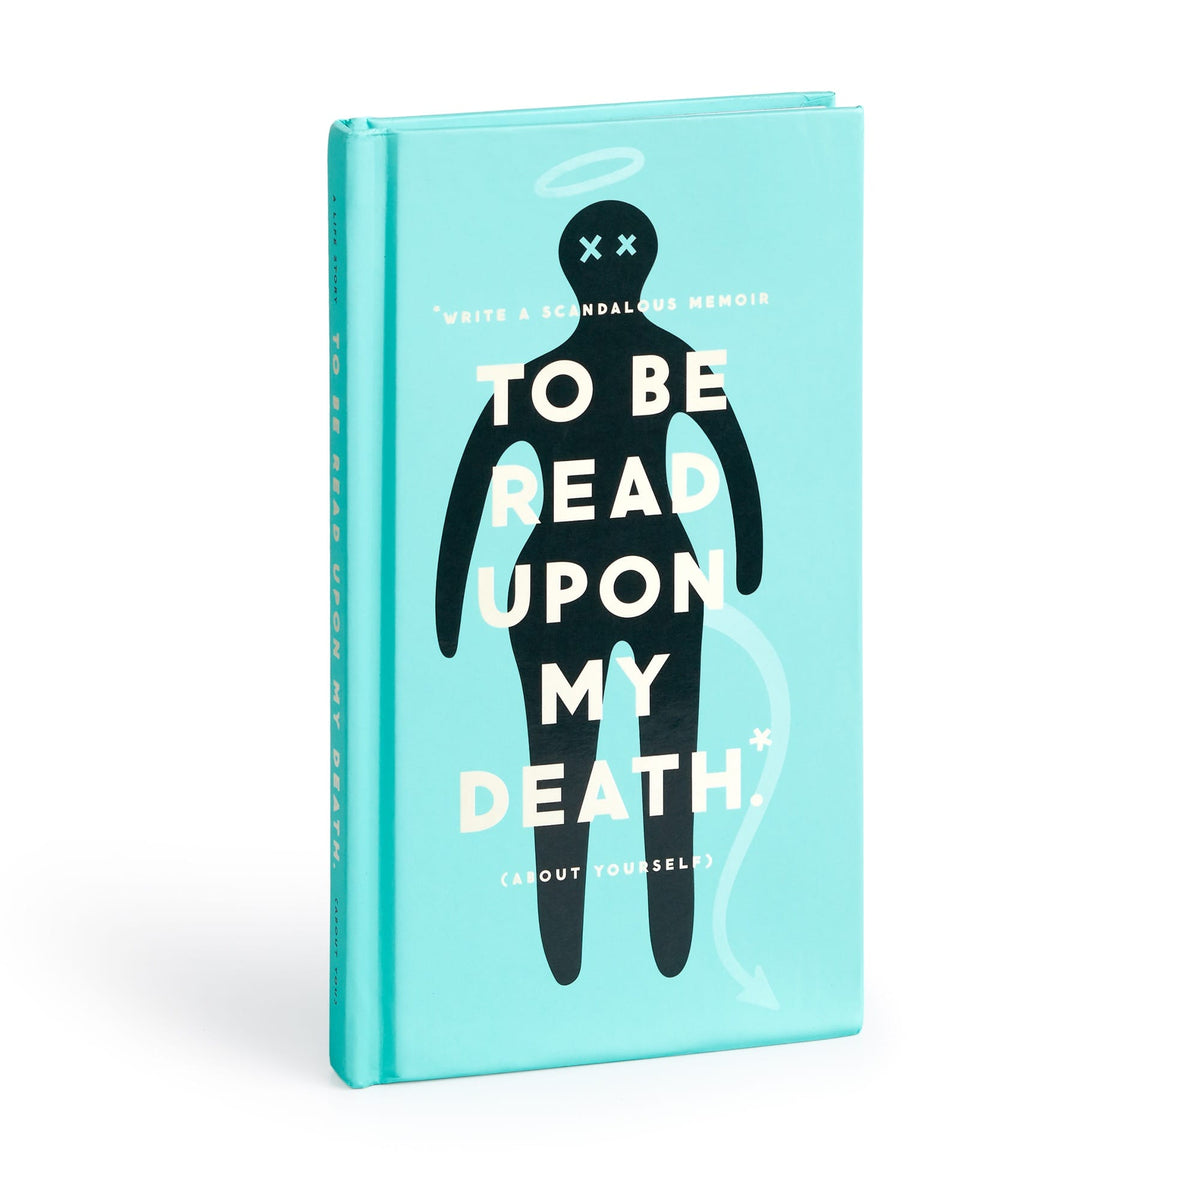 To Be Read Upon My Death Journal